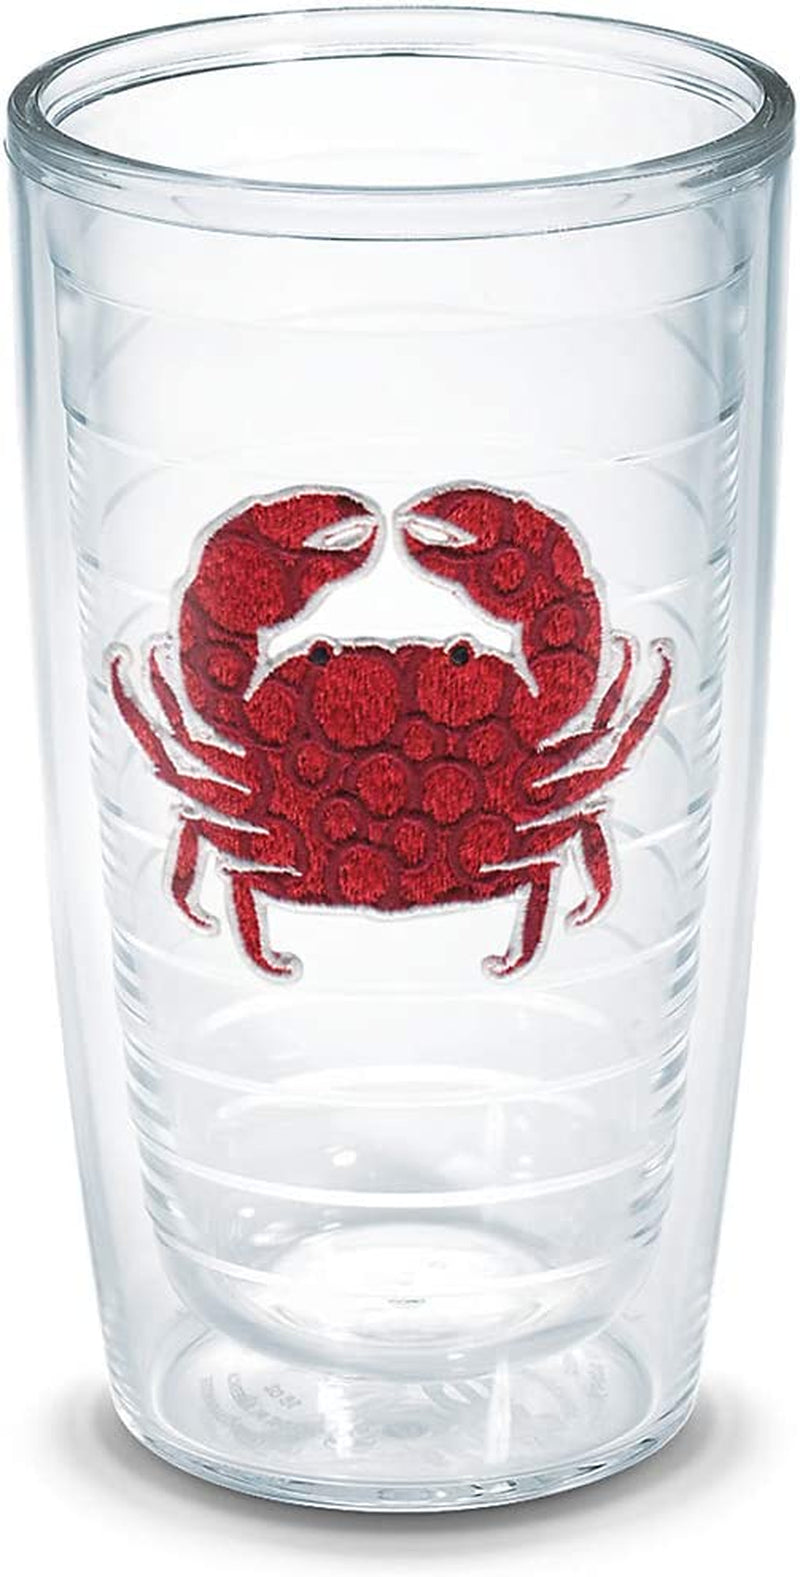 Tervis Crab Insulated Tumbler with Emblem and Red Lid, 16 Oz, Clear Home & Garden > Kitchen & Dining > Tableware > Drinkware Tervis No Lid 16oz 